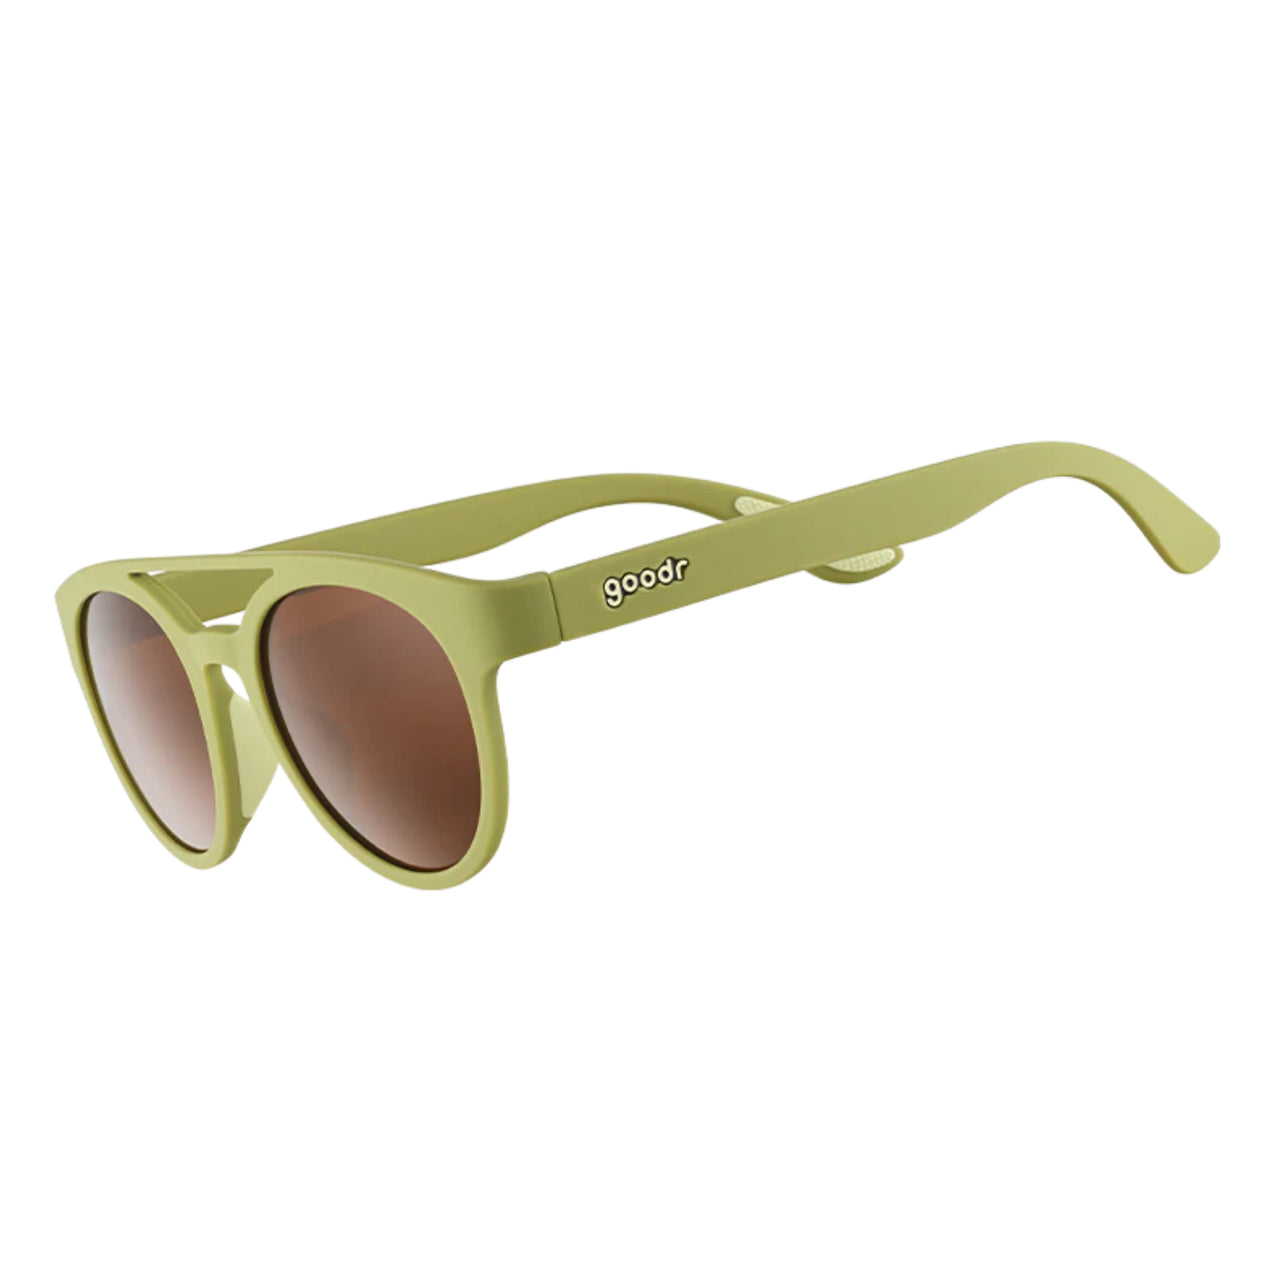 PHG Sunglasses | Fossil Finding Focals